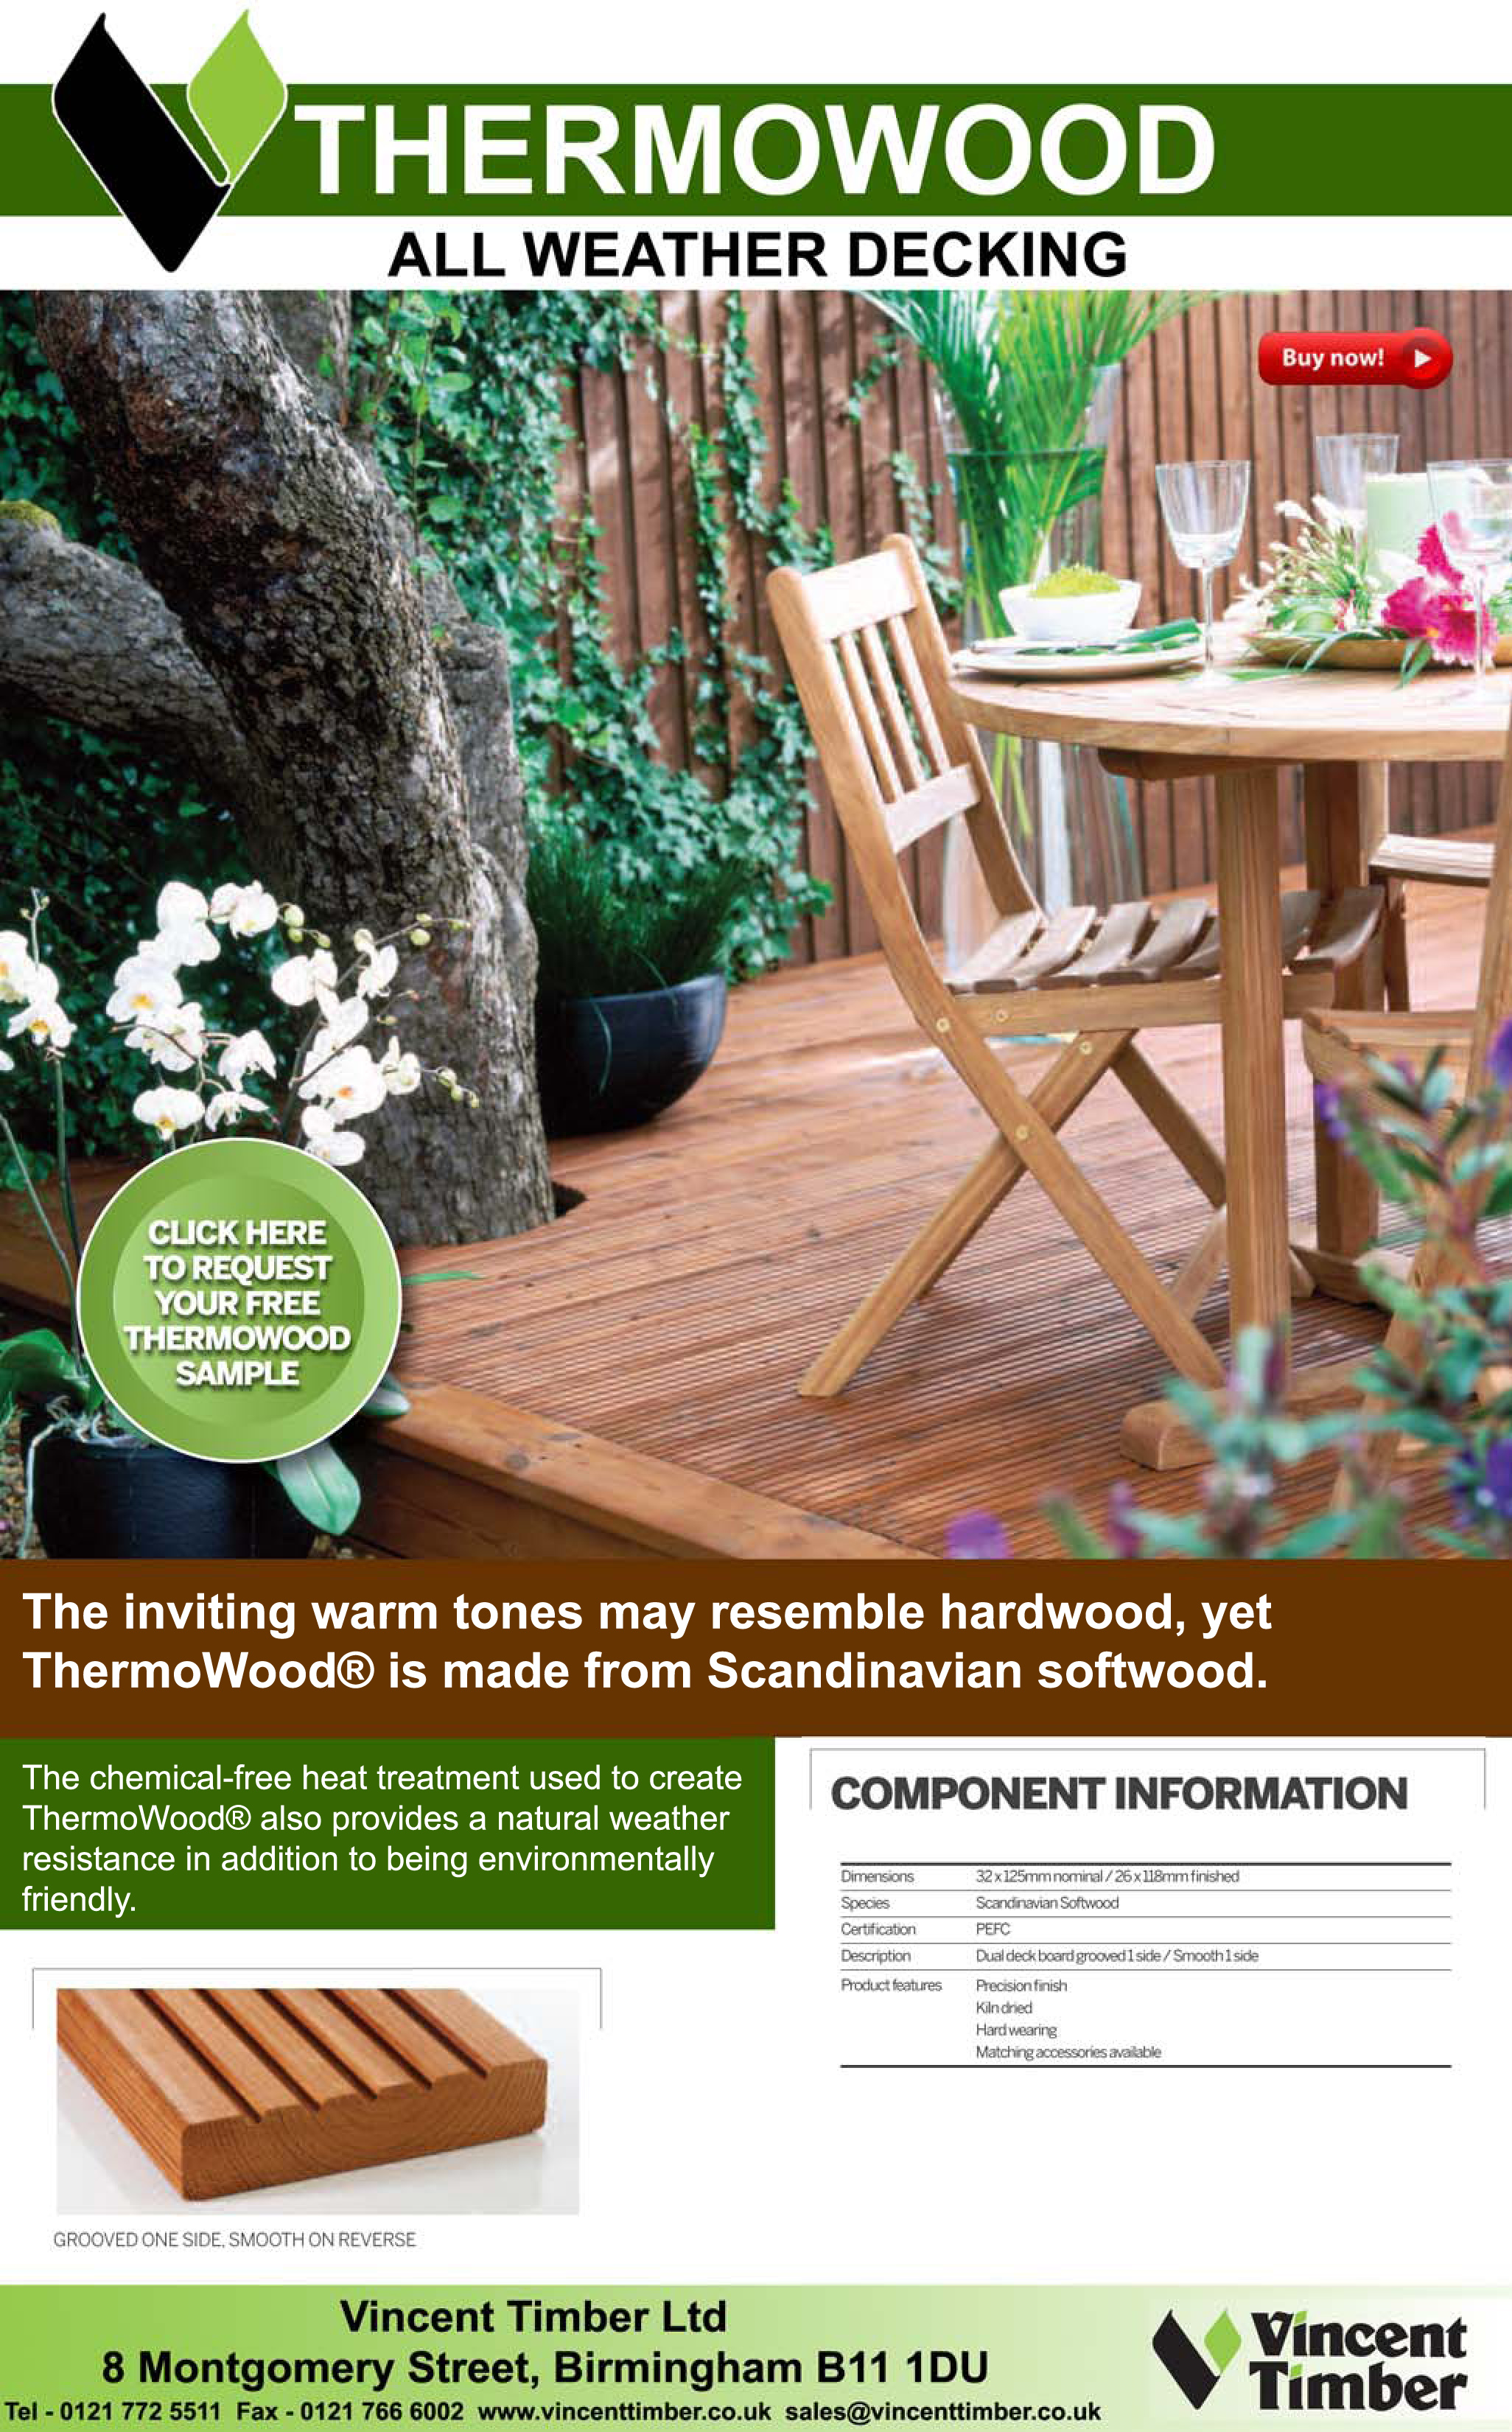 Overview of Thermowood Decking